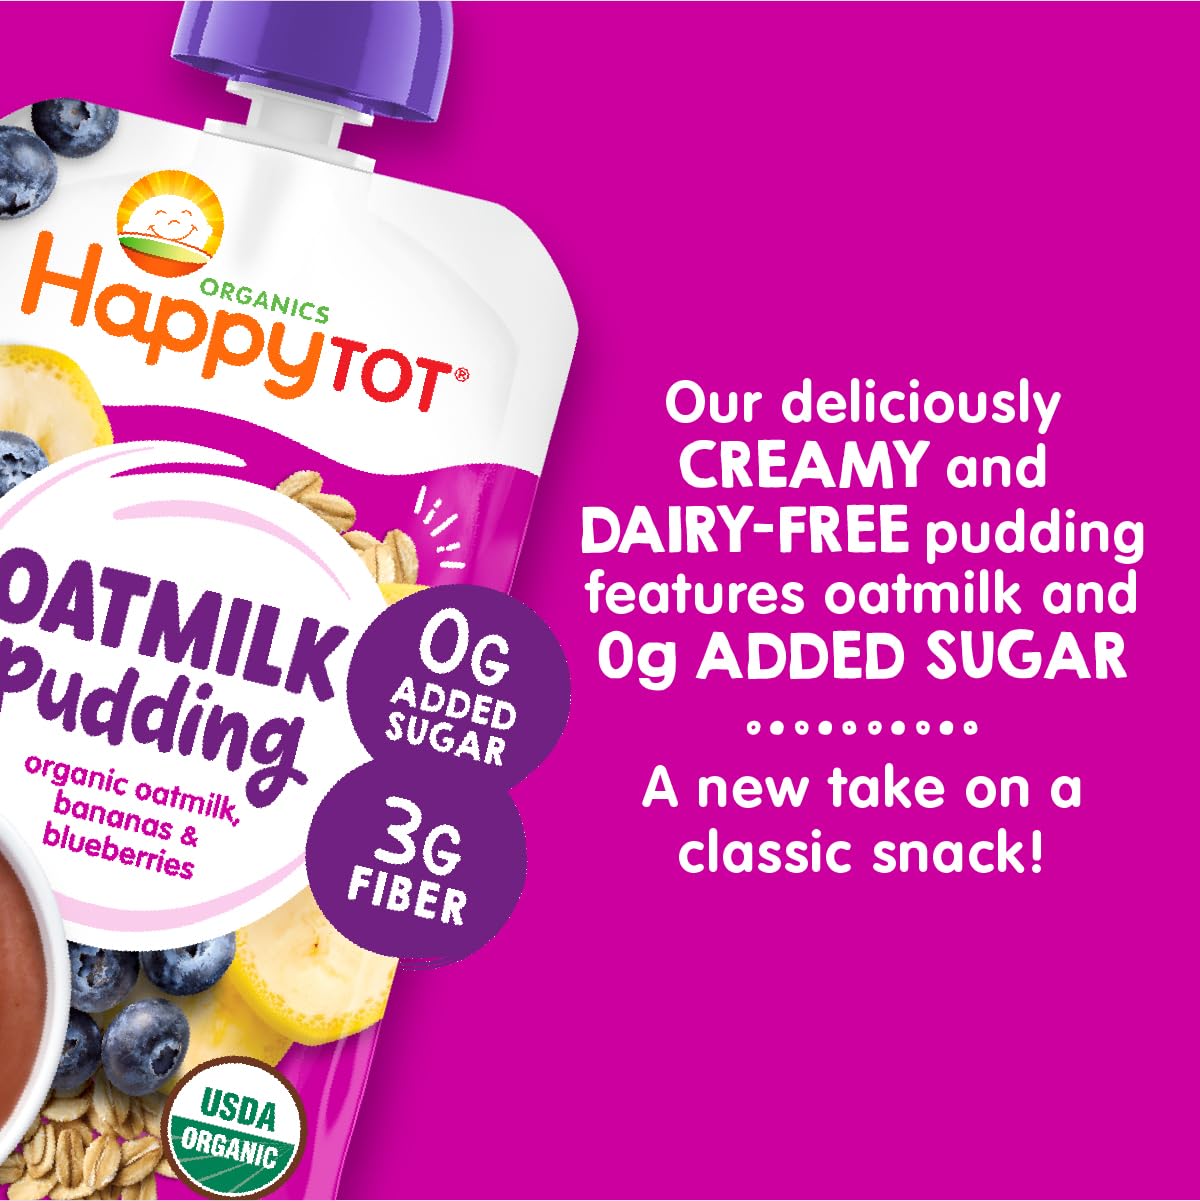 Happy Tot Oatmilk Pudding Variety Pack 4oz (Pack of 16)